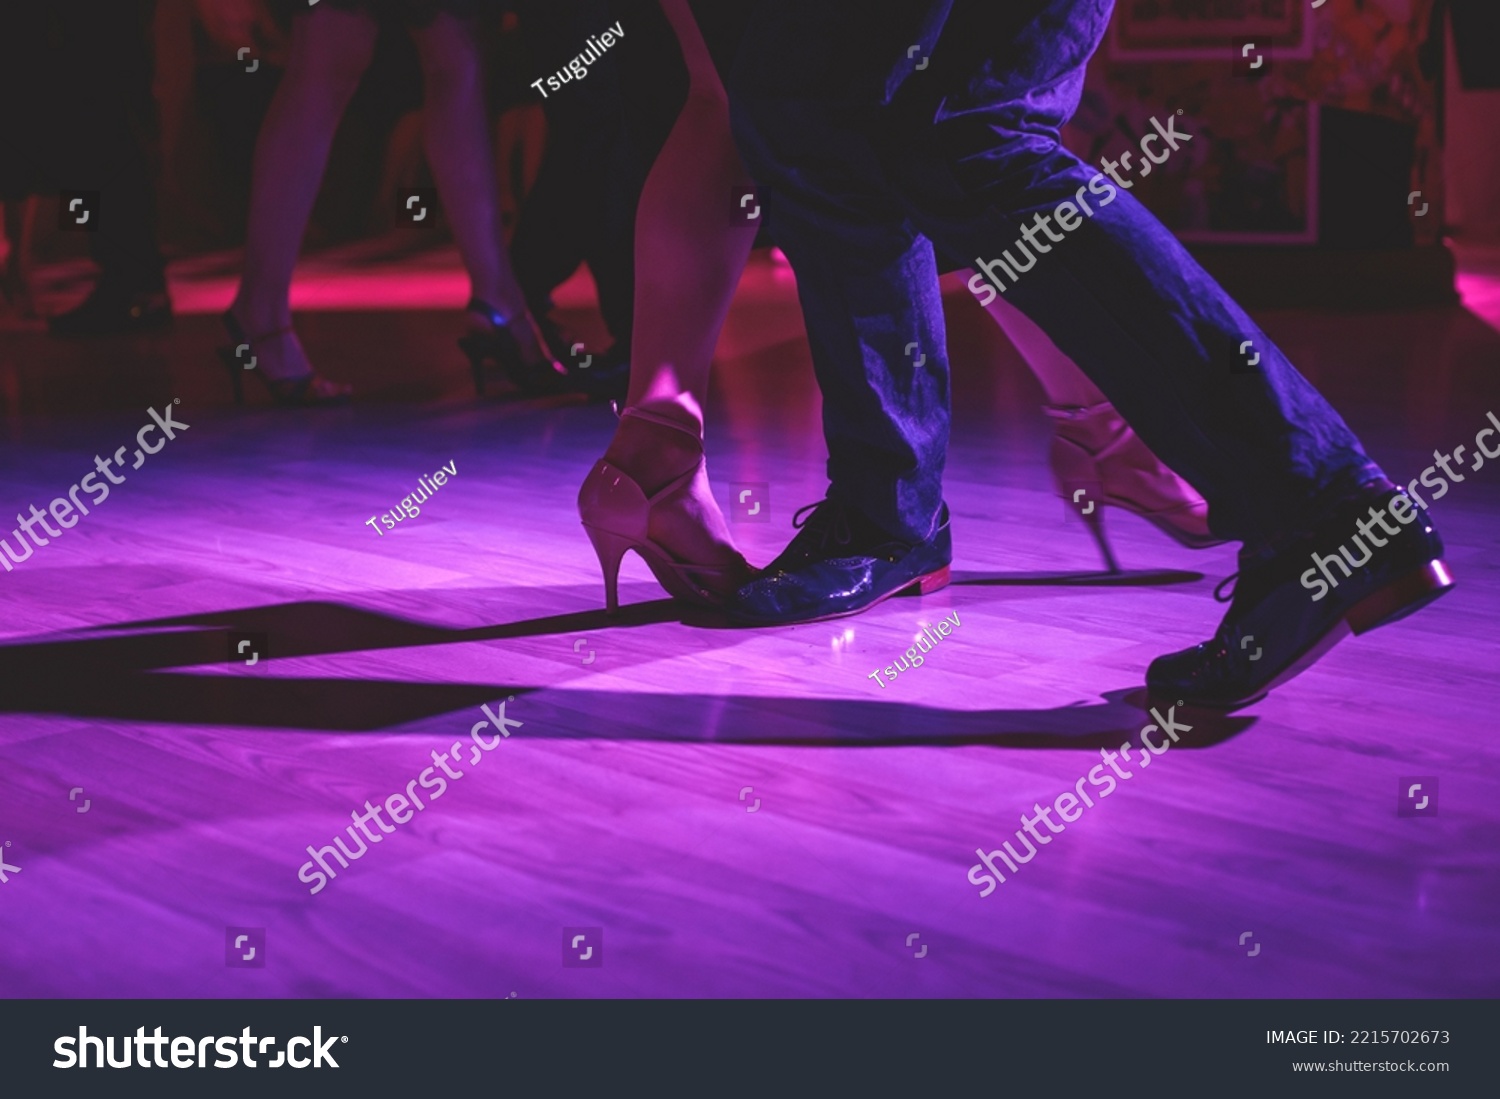 Dancing shoes of a couple, couples dancing traditional latin argentinian dance milonga in the ballroom, tango salsa bachata kizomba lesson, festival on a wooden floor, purple, red and violet lights #2215702673